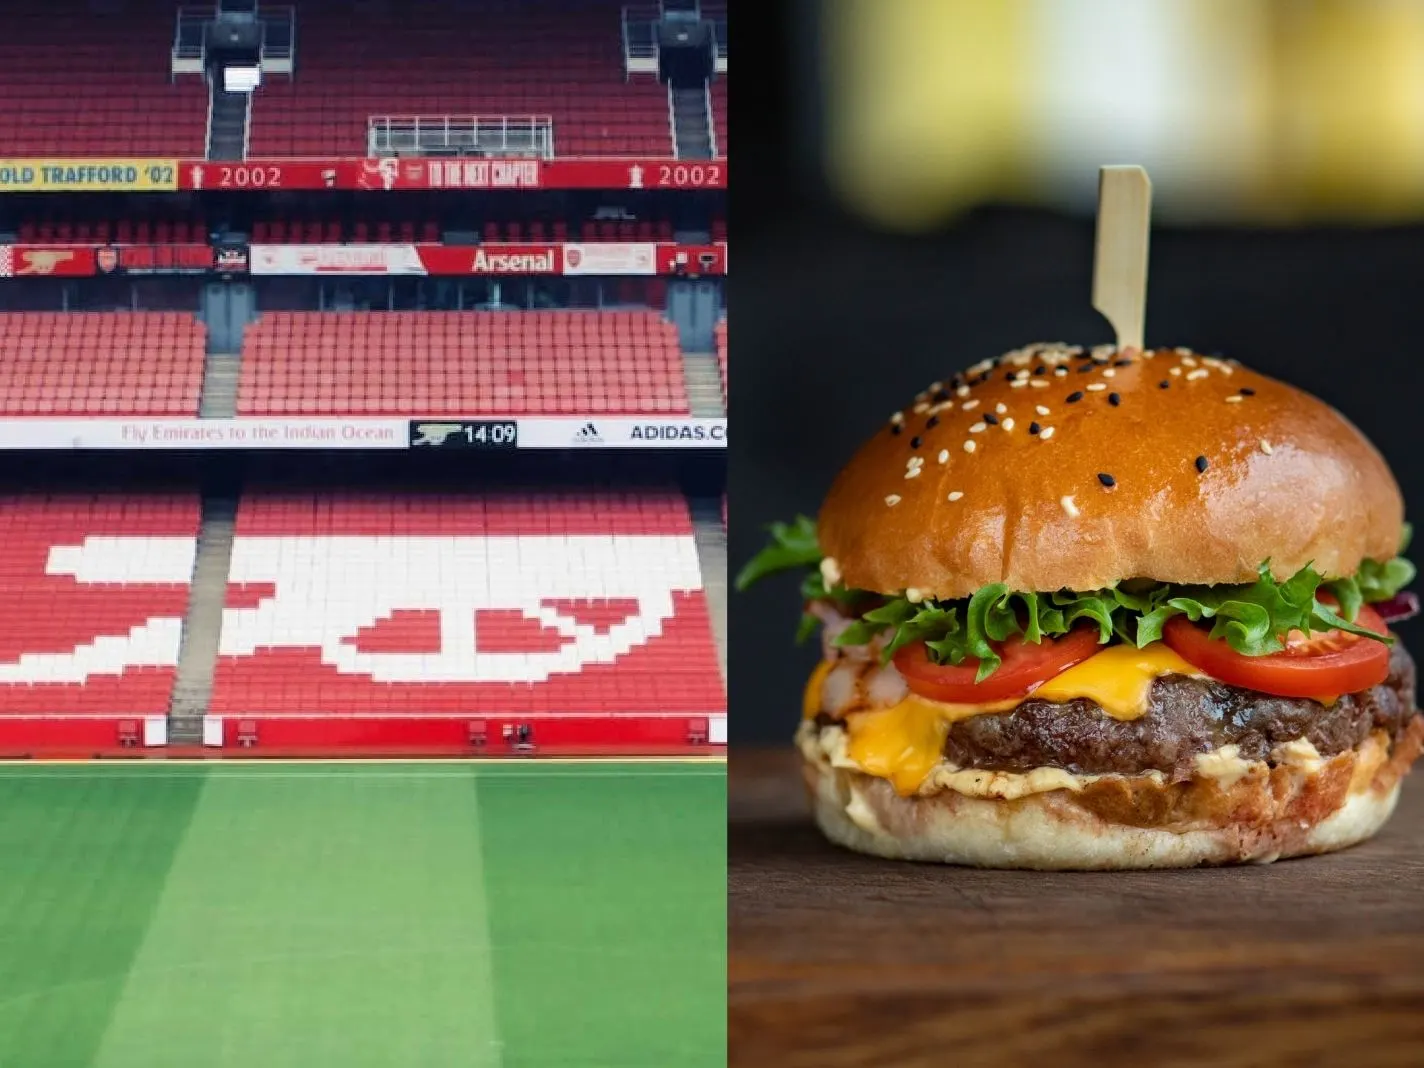 Arsenal slammed for selling cheeseburger and fries for £18 at Emirates